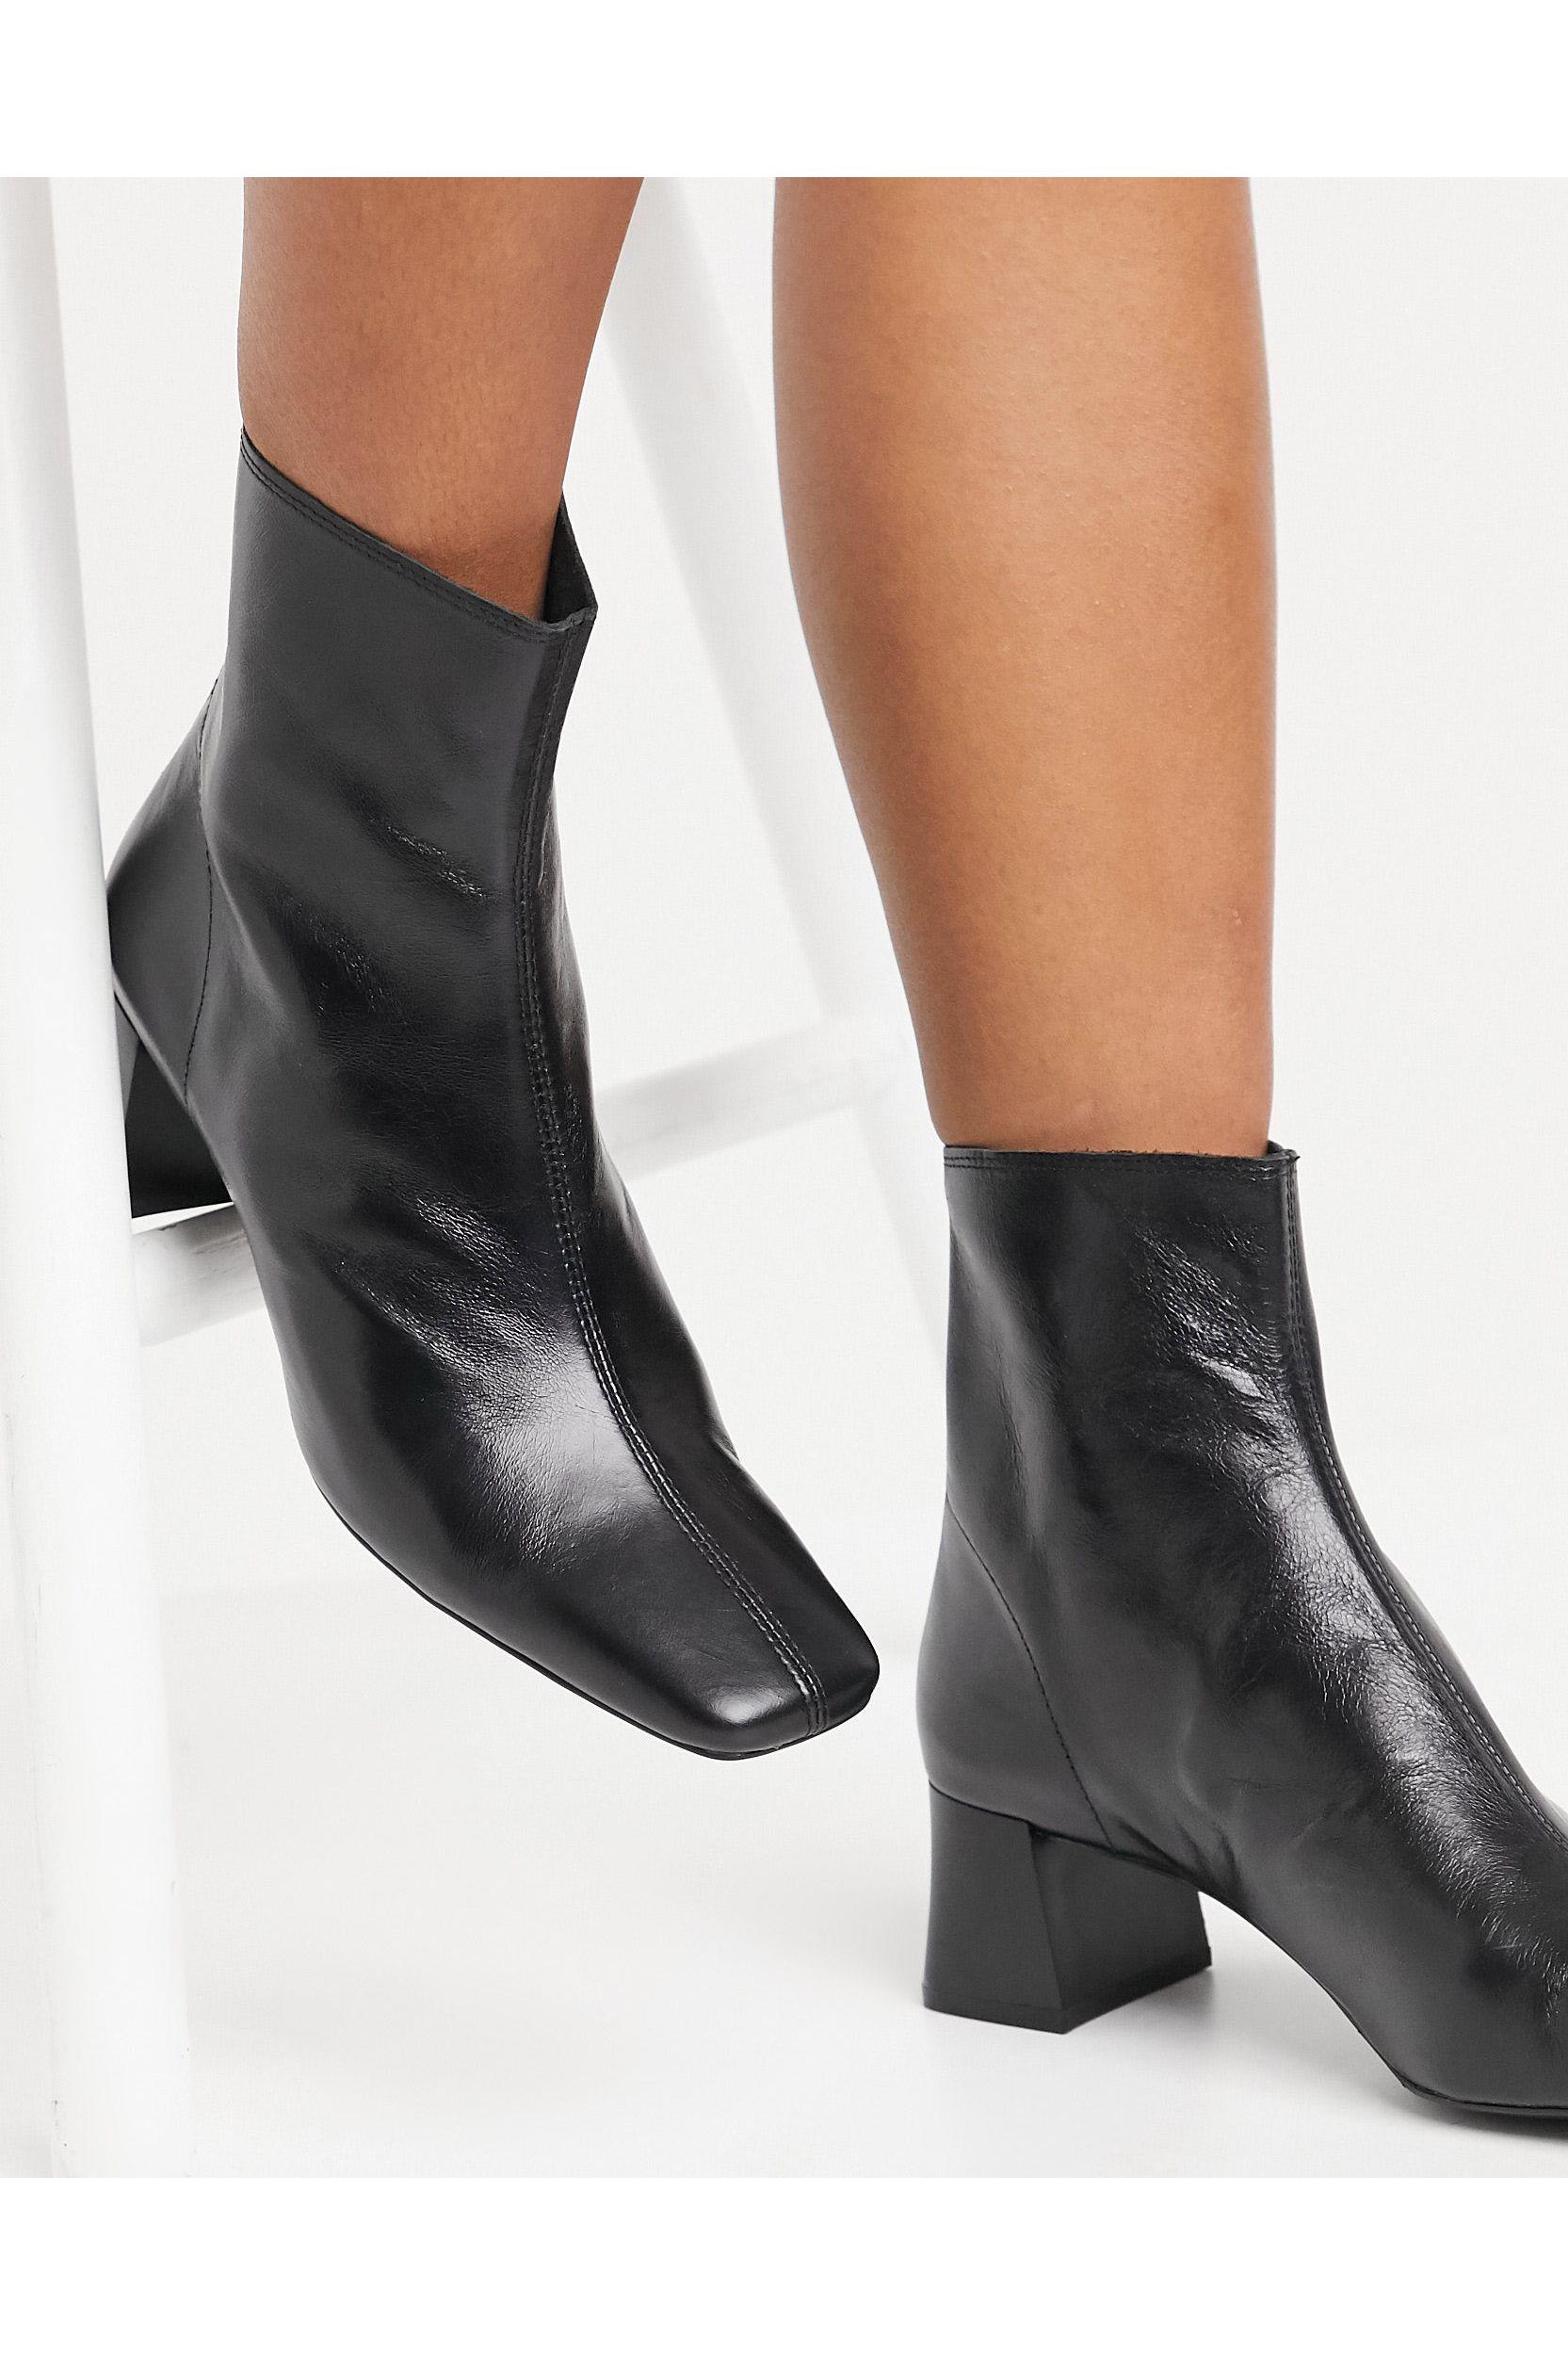 Mango Leather Mid Heel Boots in Black - Lyst